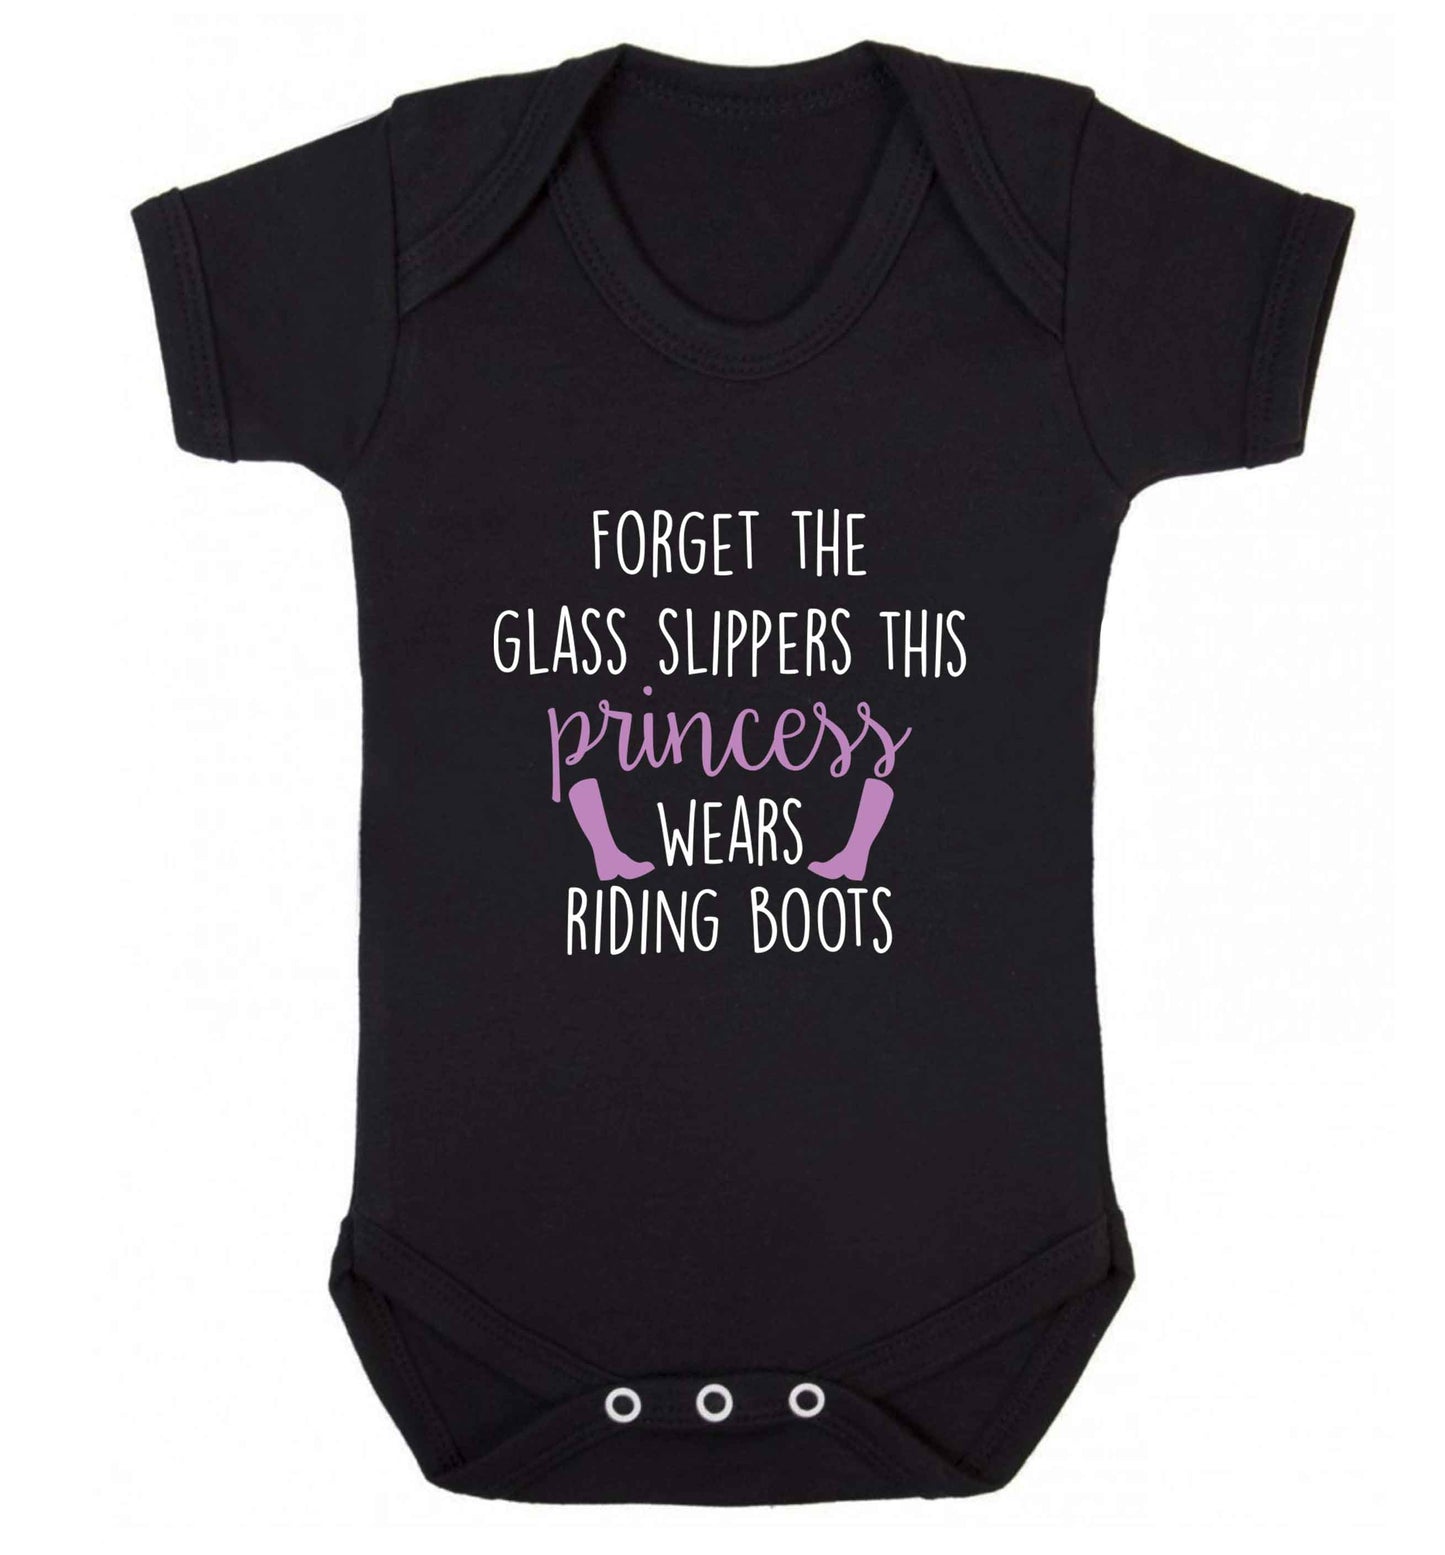 Forget the glass slippers this princess wears riding boots baby vest black 18-24 months